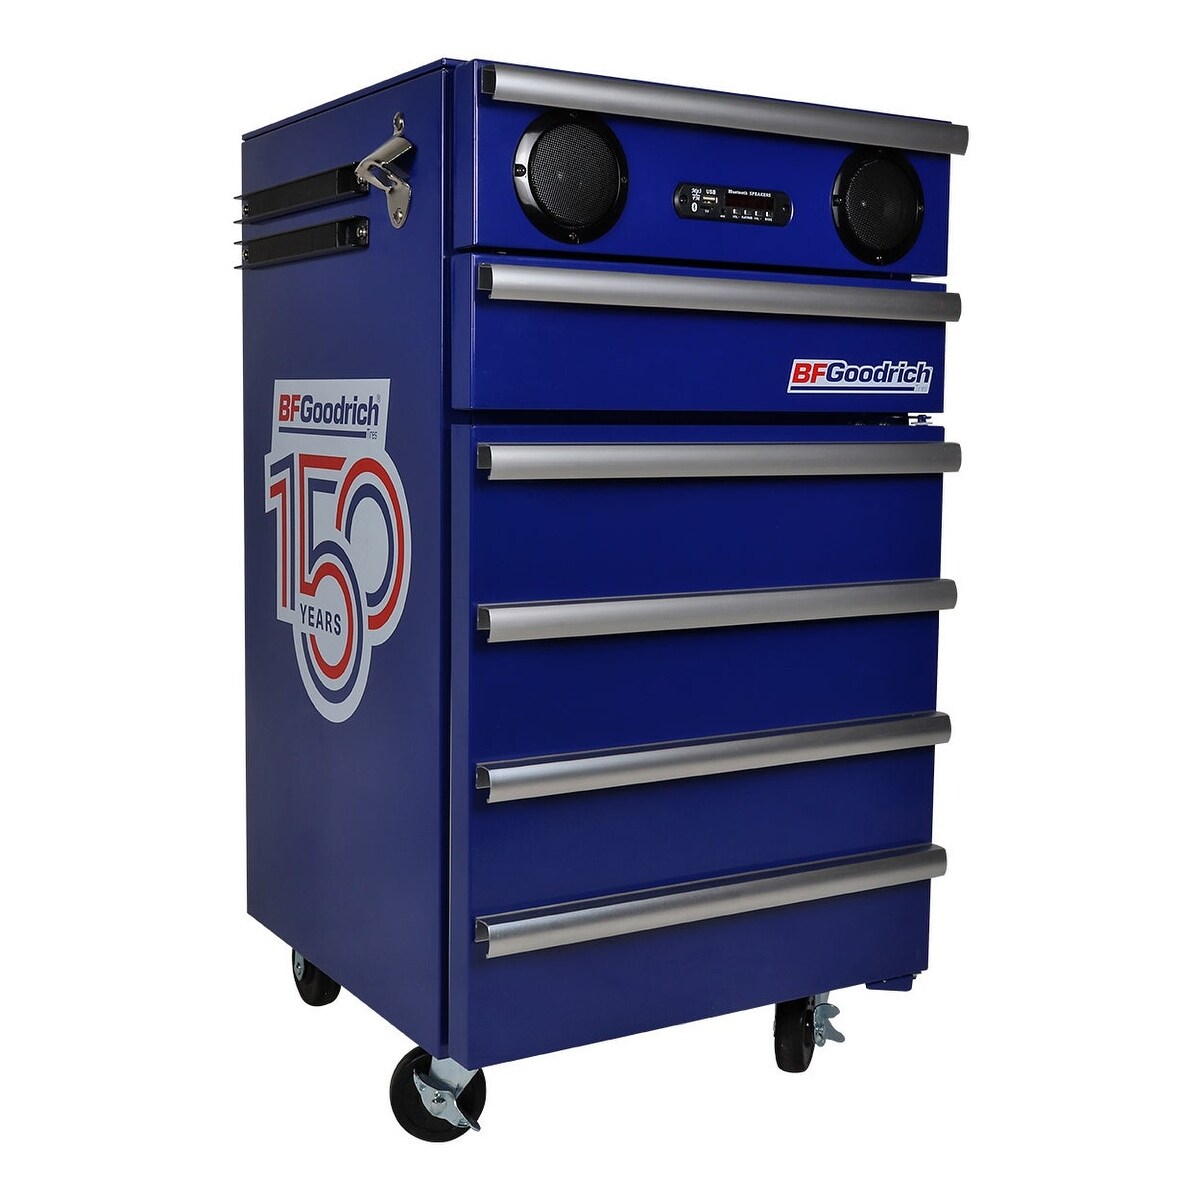 BFGoodrich 1.8 Cubic Foot (50 Liters) Tool Chest Fridge with 